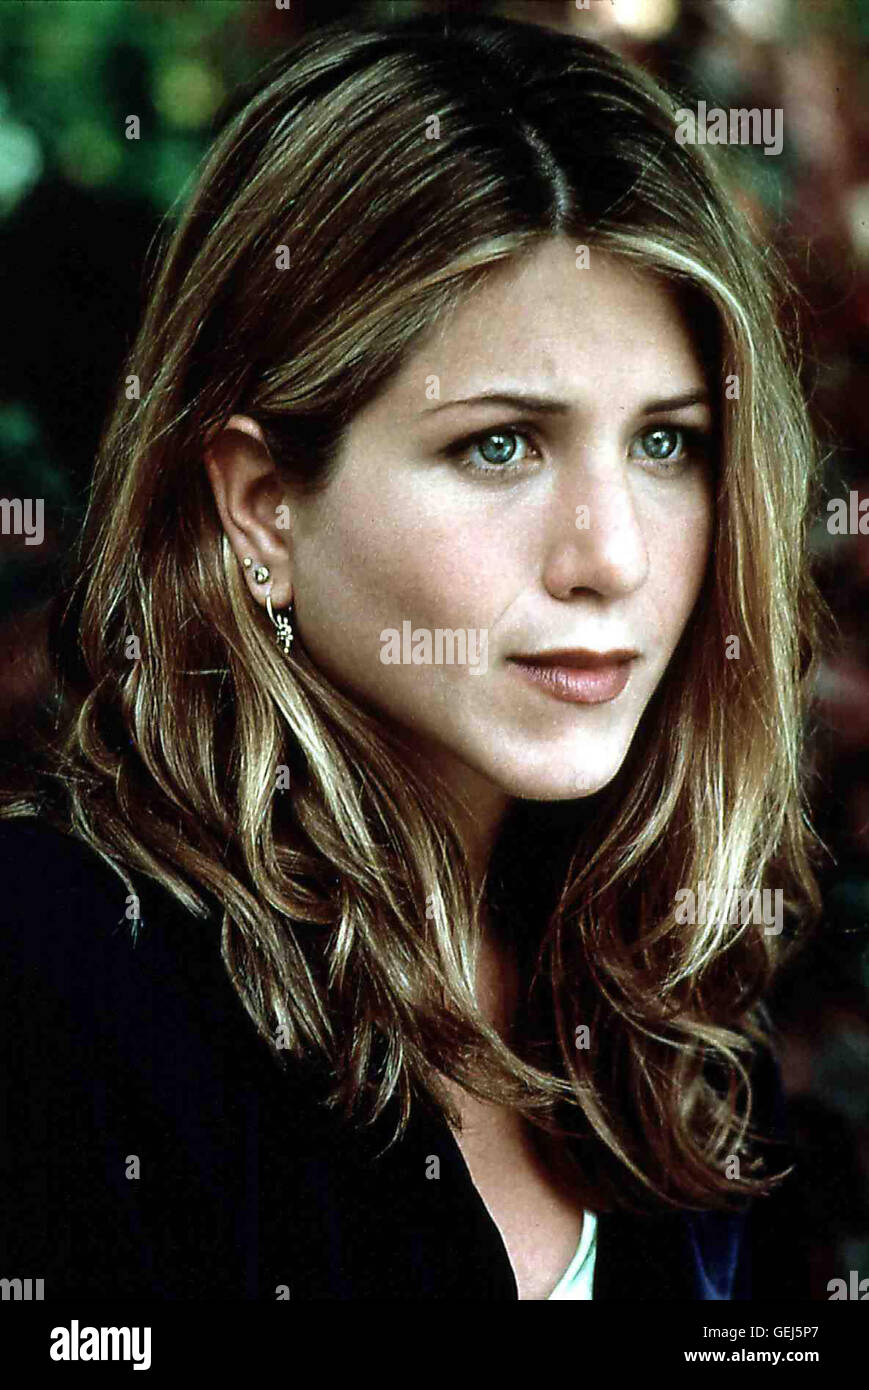 JENNIFER ANISTON, 1998 *** Local Caption *** 1998, Object Of My Affection, Liebe In Jeder Beziehung Stock Photo